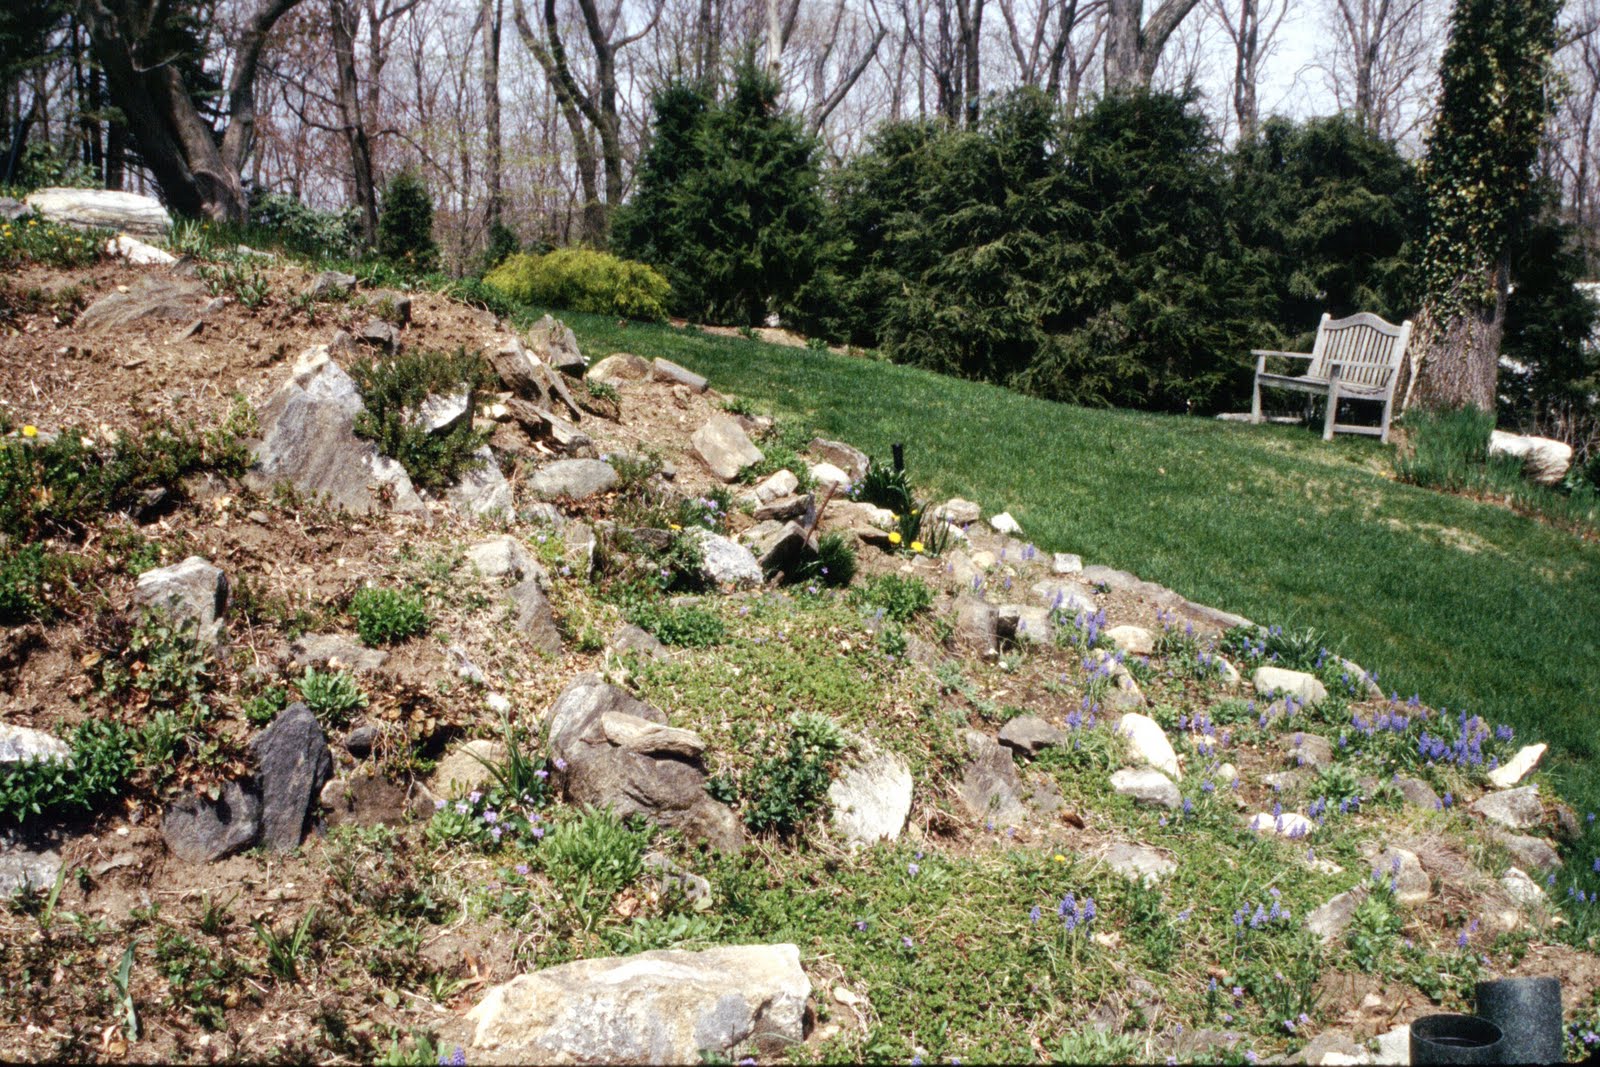 Although our rock garden could